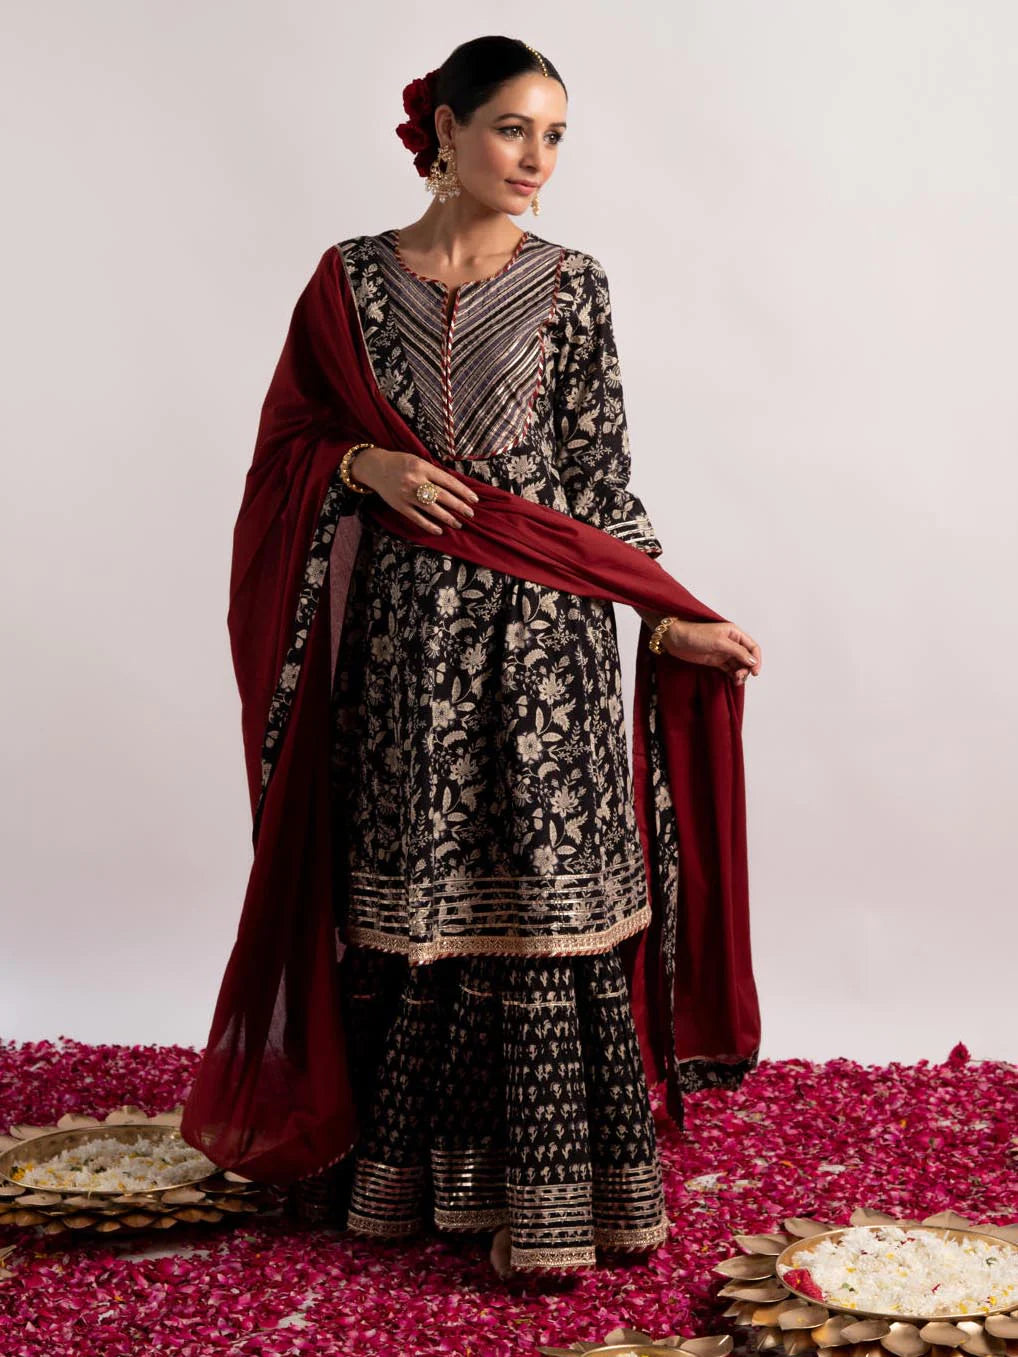 Women Clothing Online Store: Diwali and Karva Chauth Festival Karishma  Kapoor Special Floor Length Anarkali Suits Online With Diwscount Offer Price